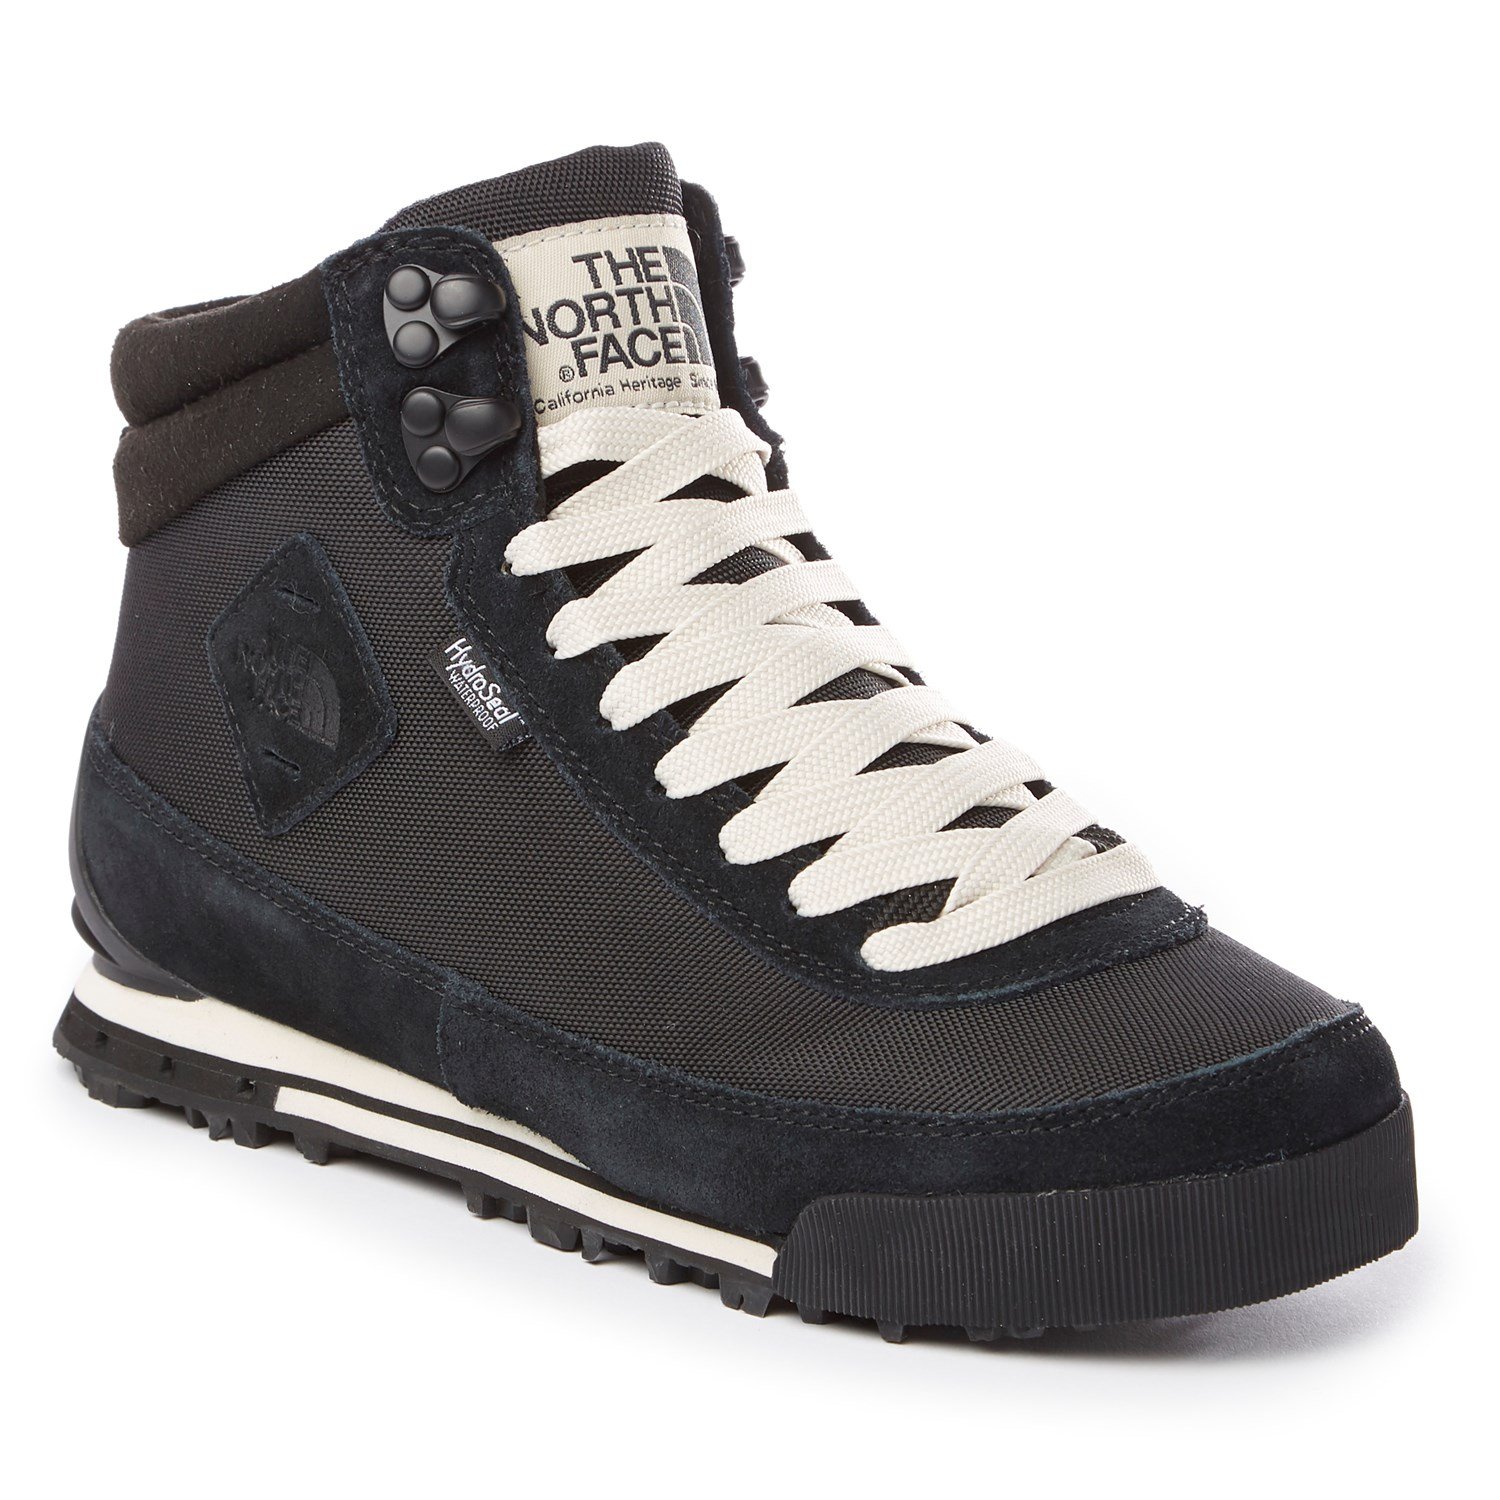 the north face back to berkeley women's